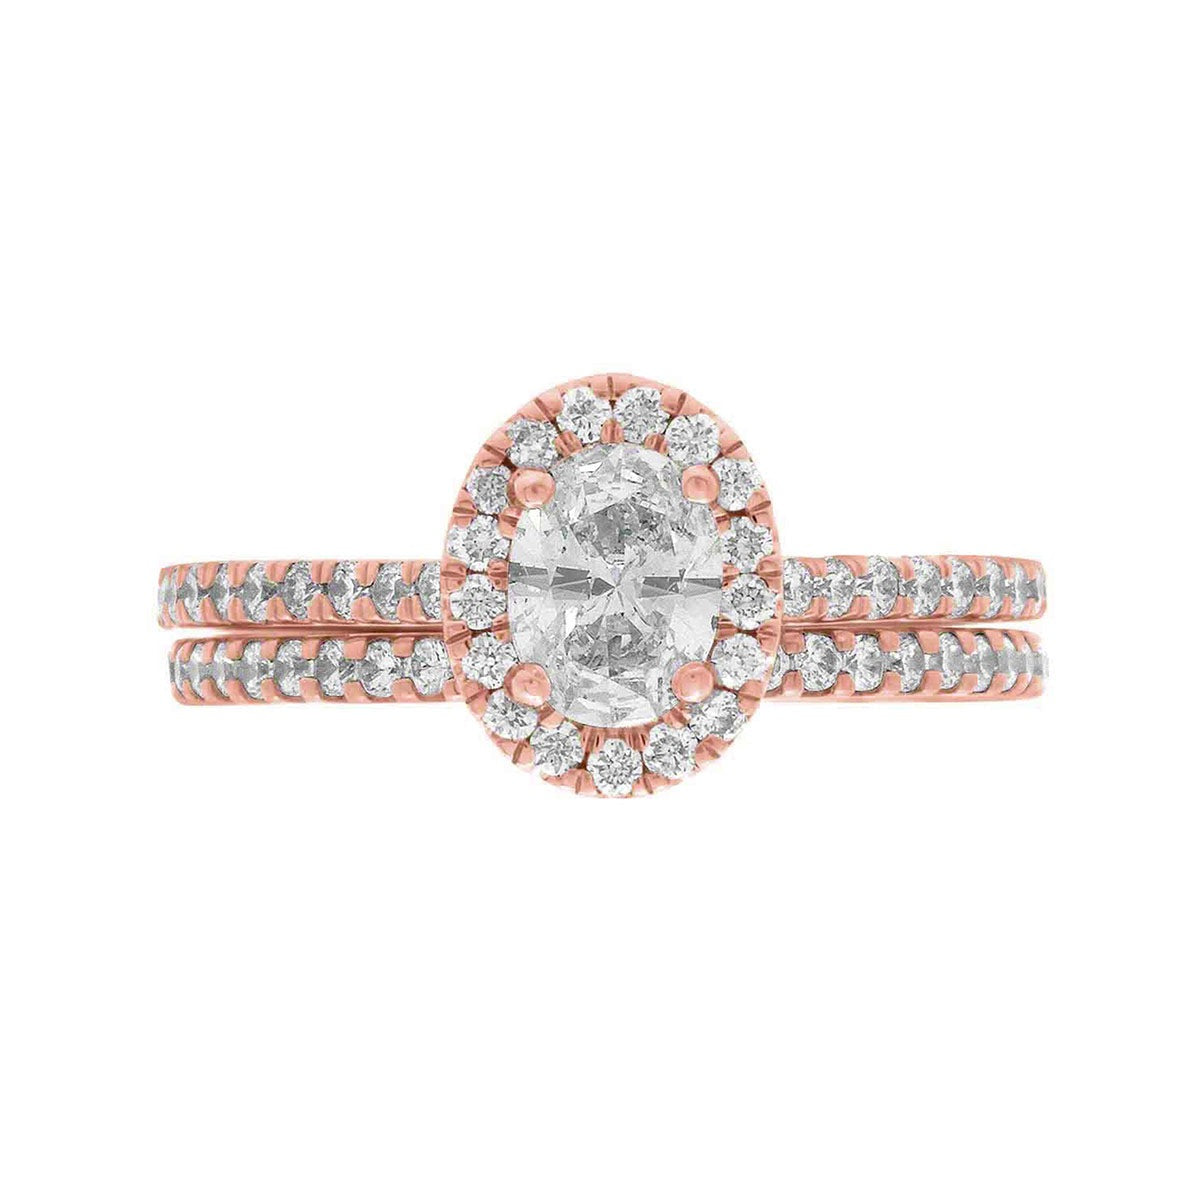 Oval Halo Engagement Ring made of rose gold pictured with a a matching diamond wedding ring